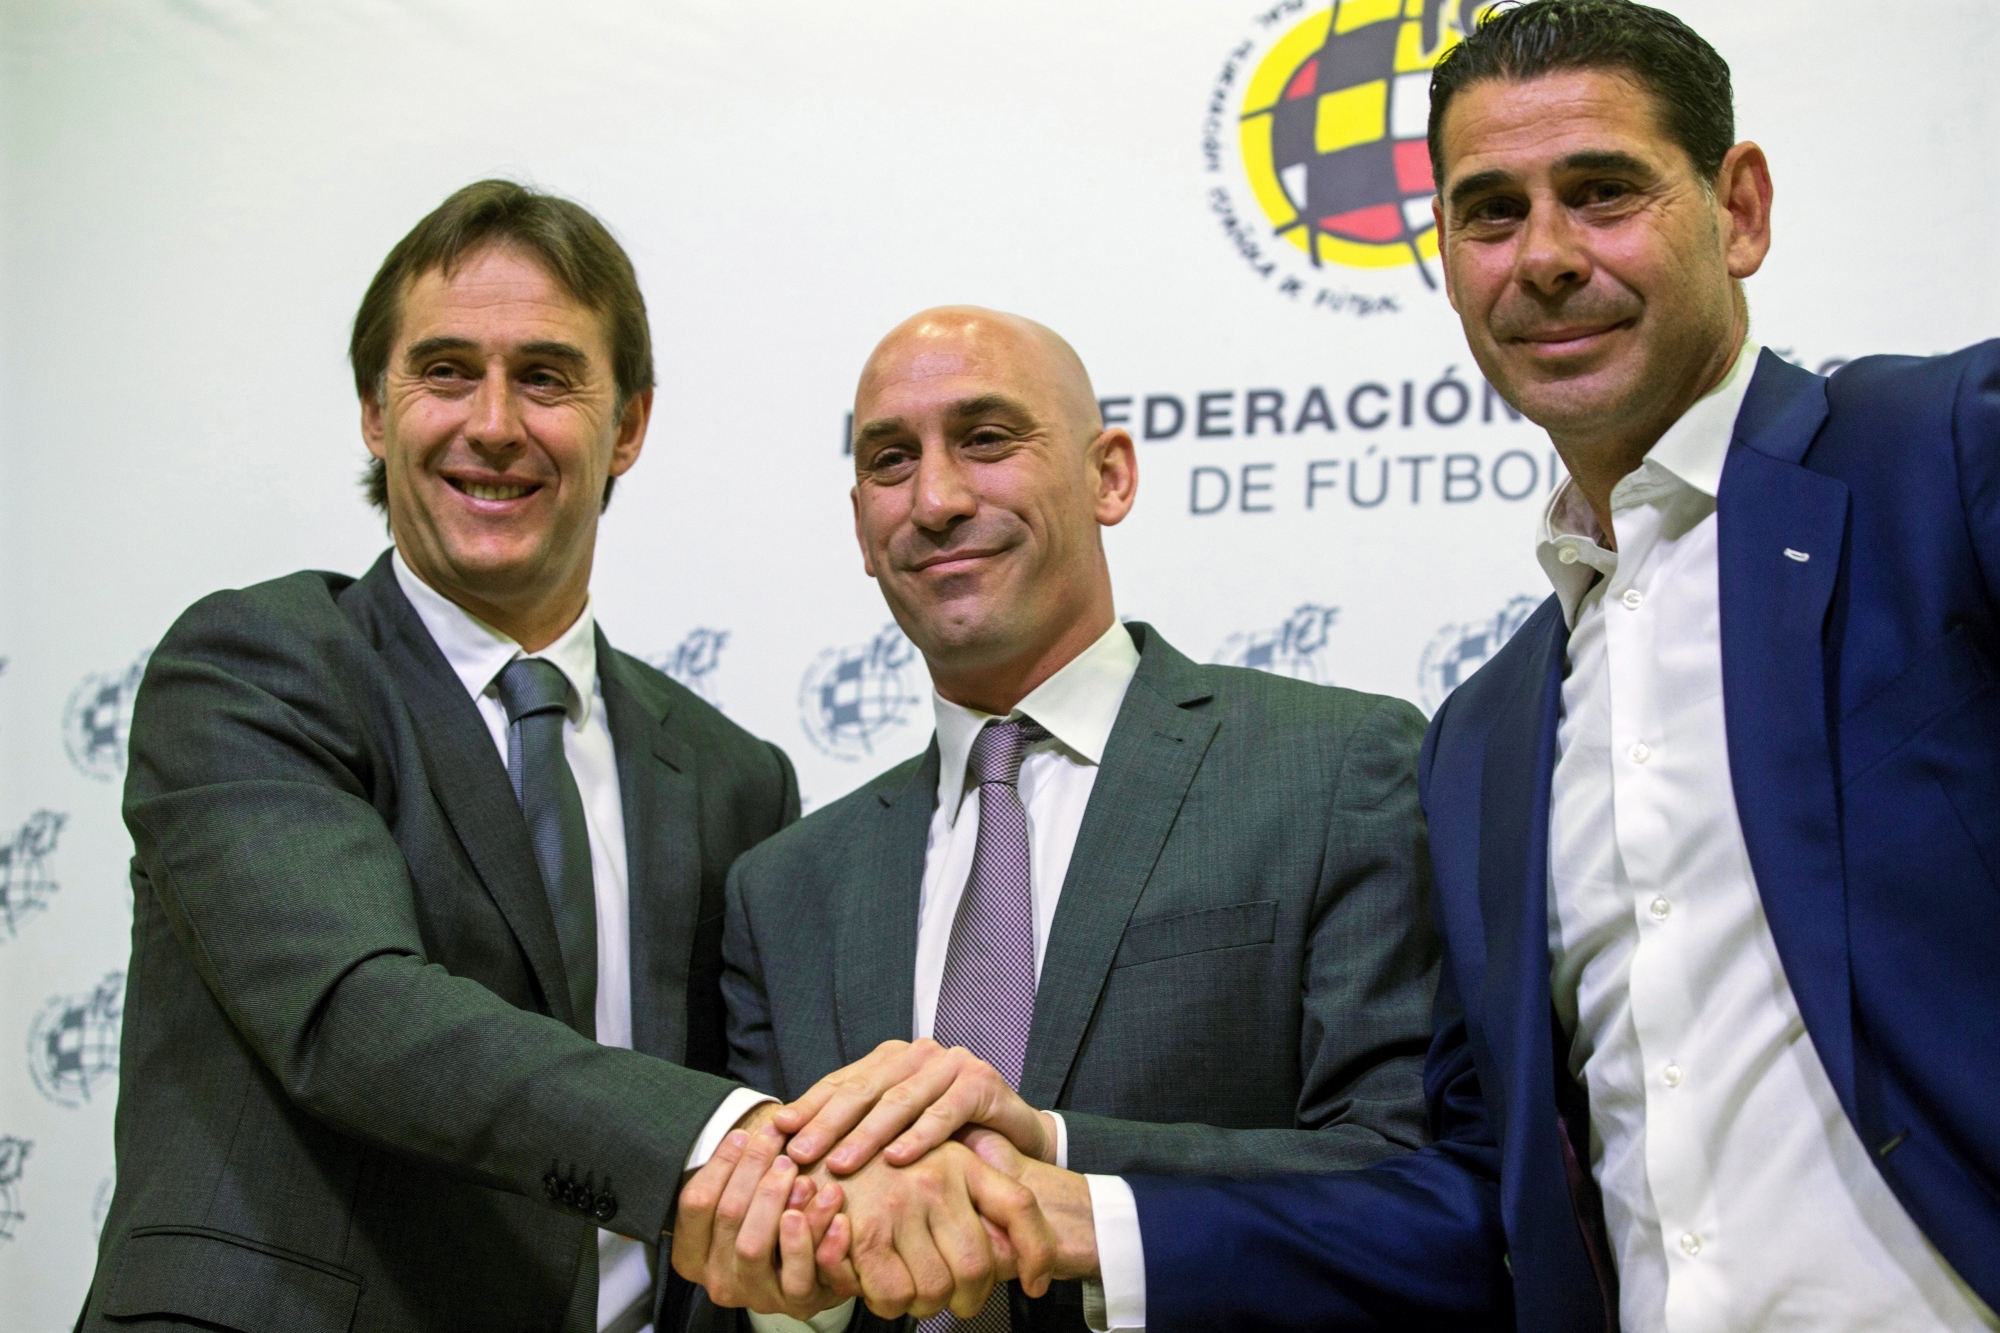 epa06804727 (FILE) - Spanish national soccer team head coach Julen Lopetegui (L) poses for photographers with Luis Rubiales (C), new president of the Royal Spanish Football Federation (RFEF), and RFEF sports director Fernando Hierro (R) after extending his contract in Las Rozas, Madrid, Spain, 22 May 2018 (re-issued 13 June 2018). Rubiales confirmed on 13 June 2018 that Lopetegui has been sacked as national coach one day after agreeing to take over Real Madrid. Hierro will take charge of the Spanish team during the FIFA World Cup 2018.  EPA/RODRIGO JIMENEZ (FILE) SPAIN SOCCER LOPETEGUI